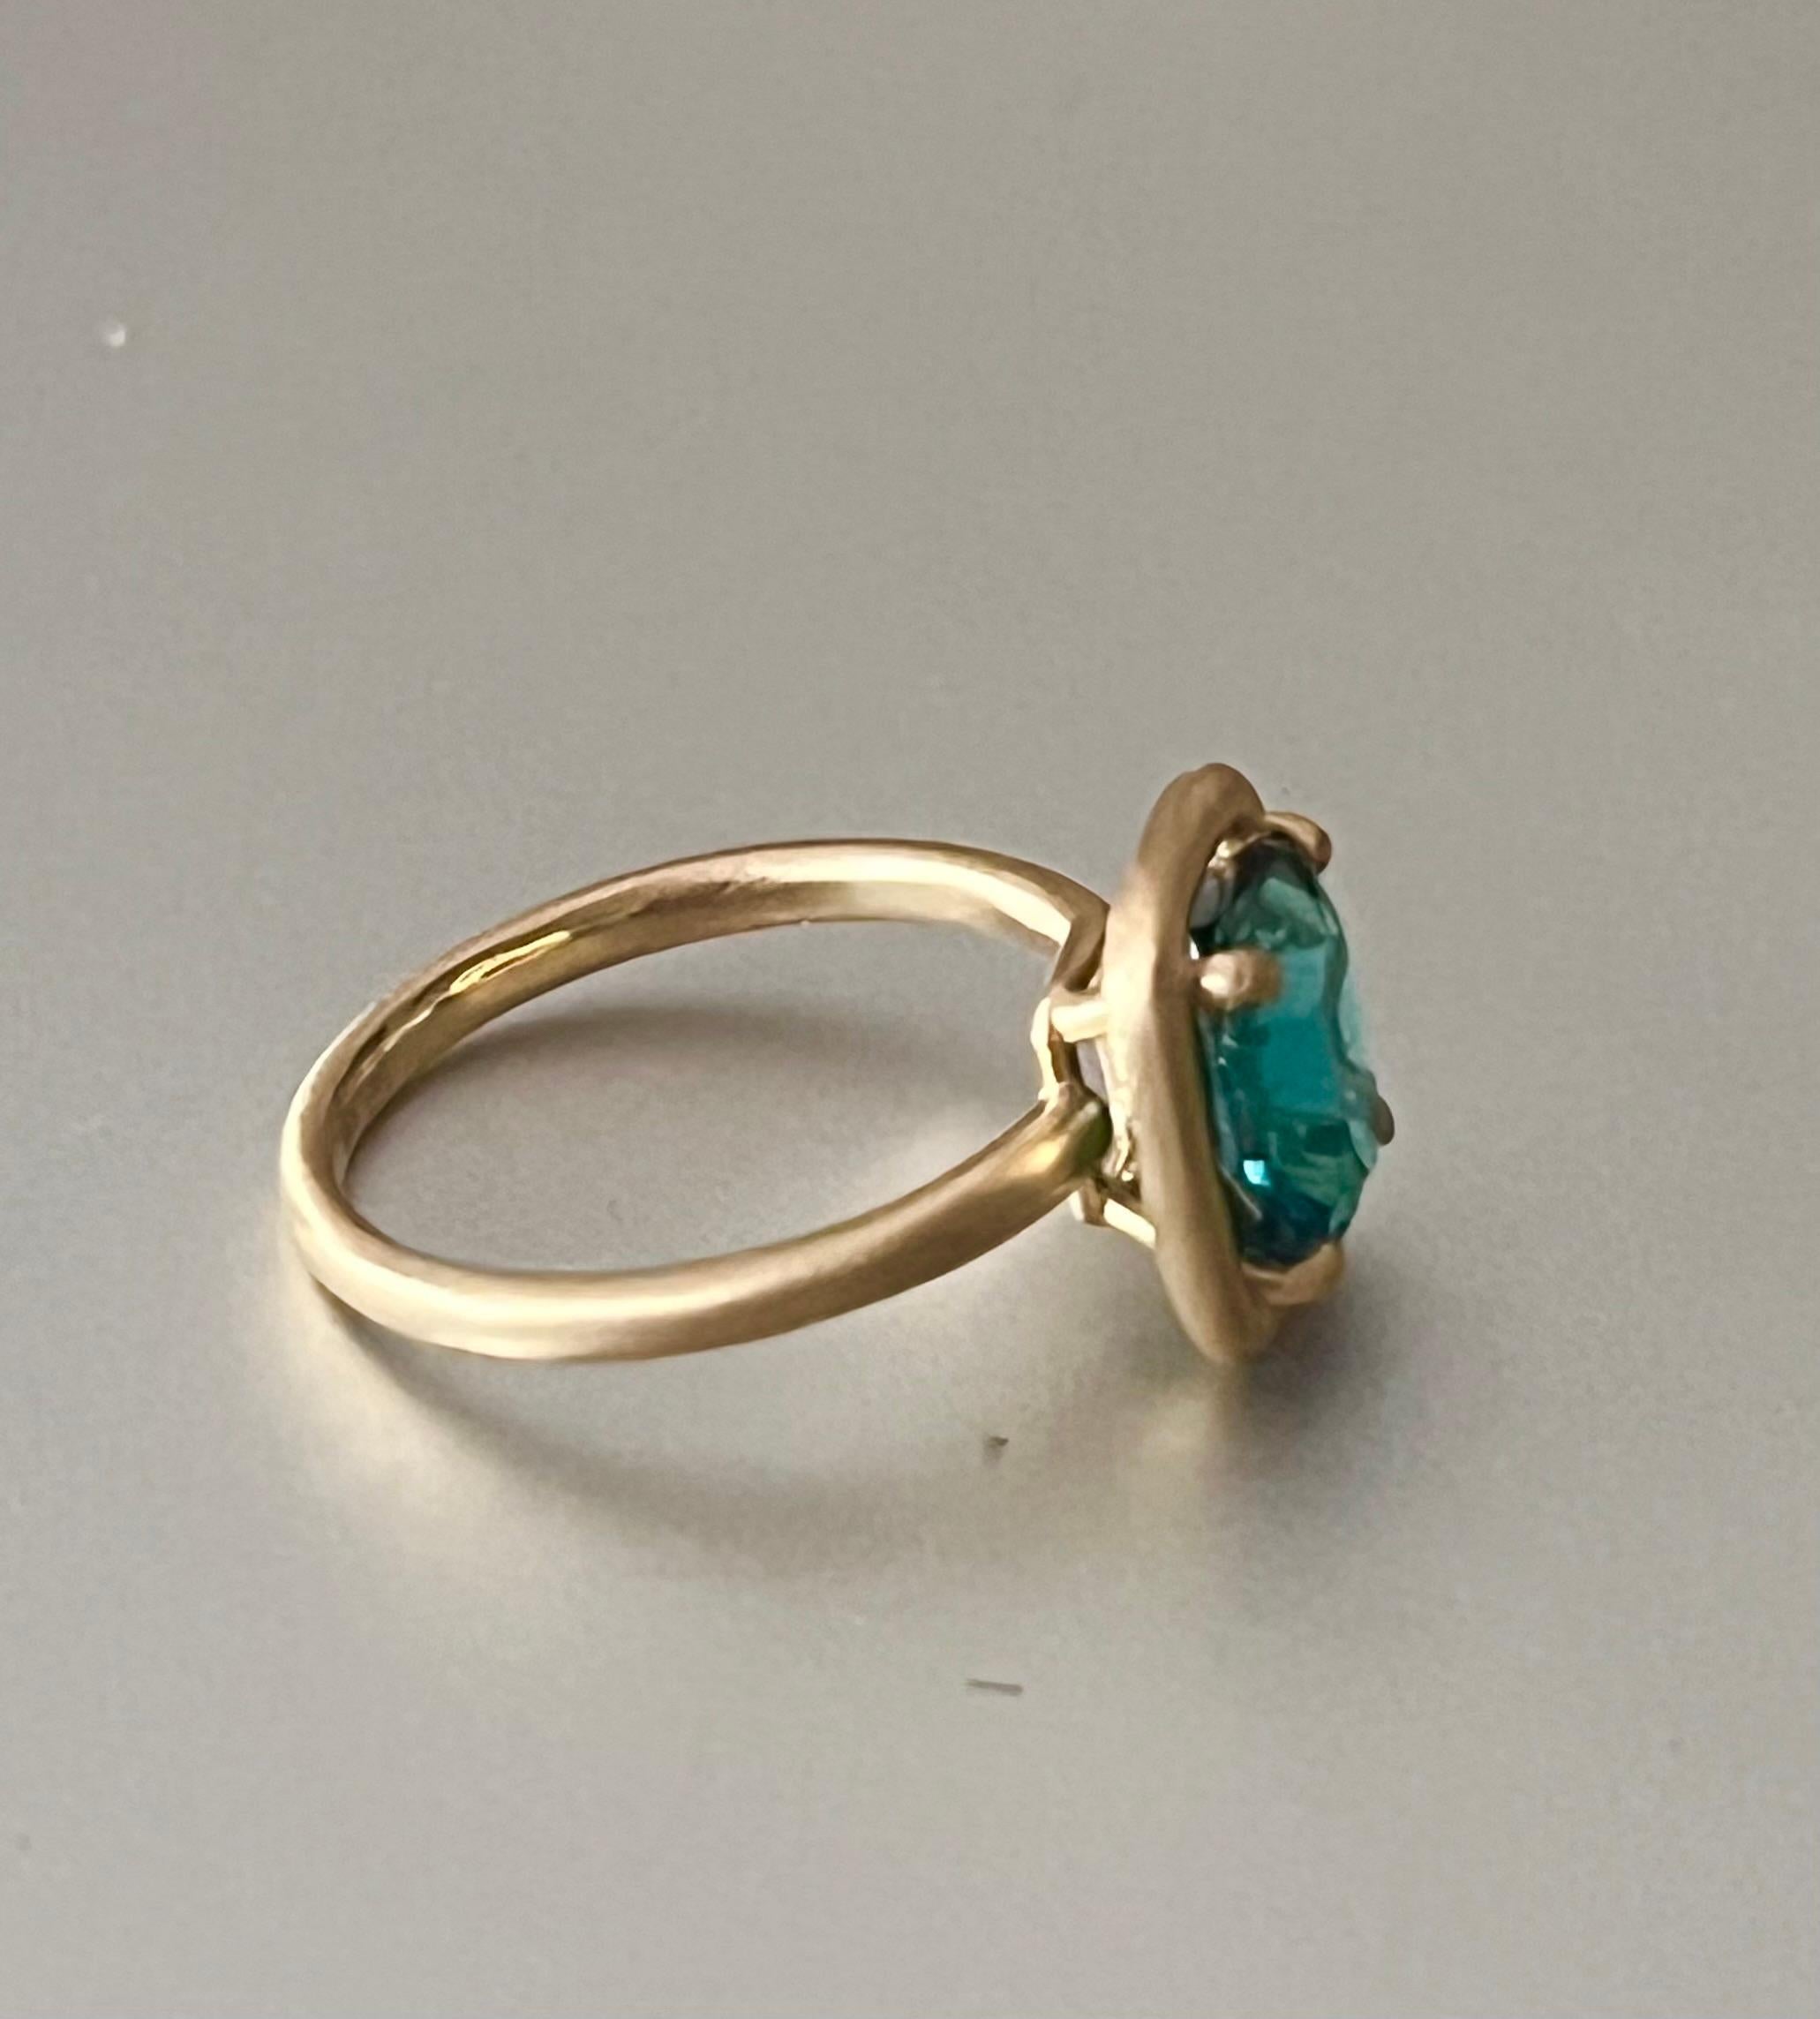 This is an unbelievable gem, AAA Indicolite, or Blue Tourmaline 2.5cts.  Set in solid 18K yellow gold with a satin finish.  Size is a 6 but easily sized by the designer, or any good jeweler.  

Please feel free to ask questions, Rachel has been